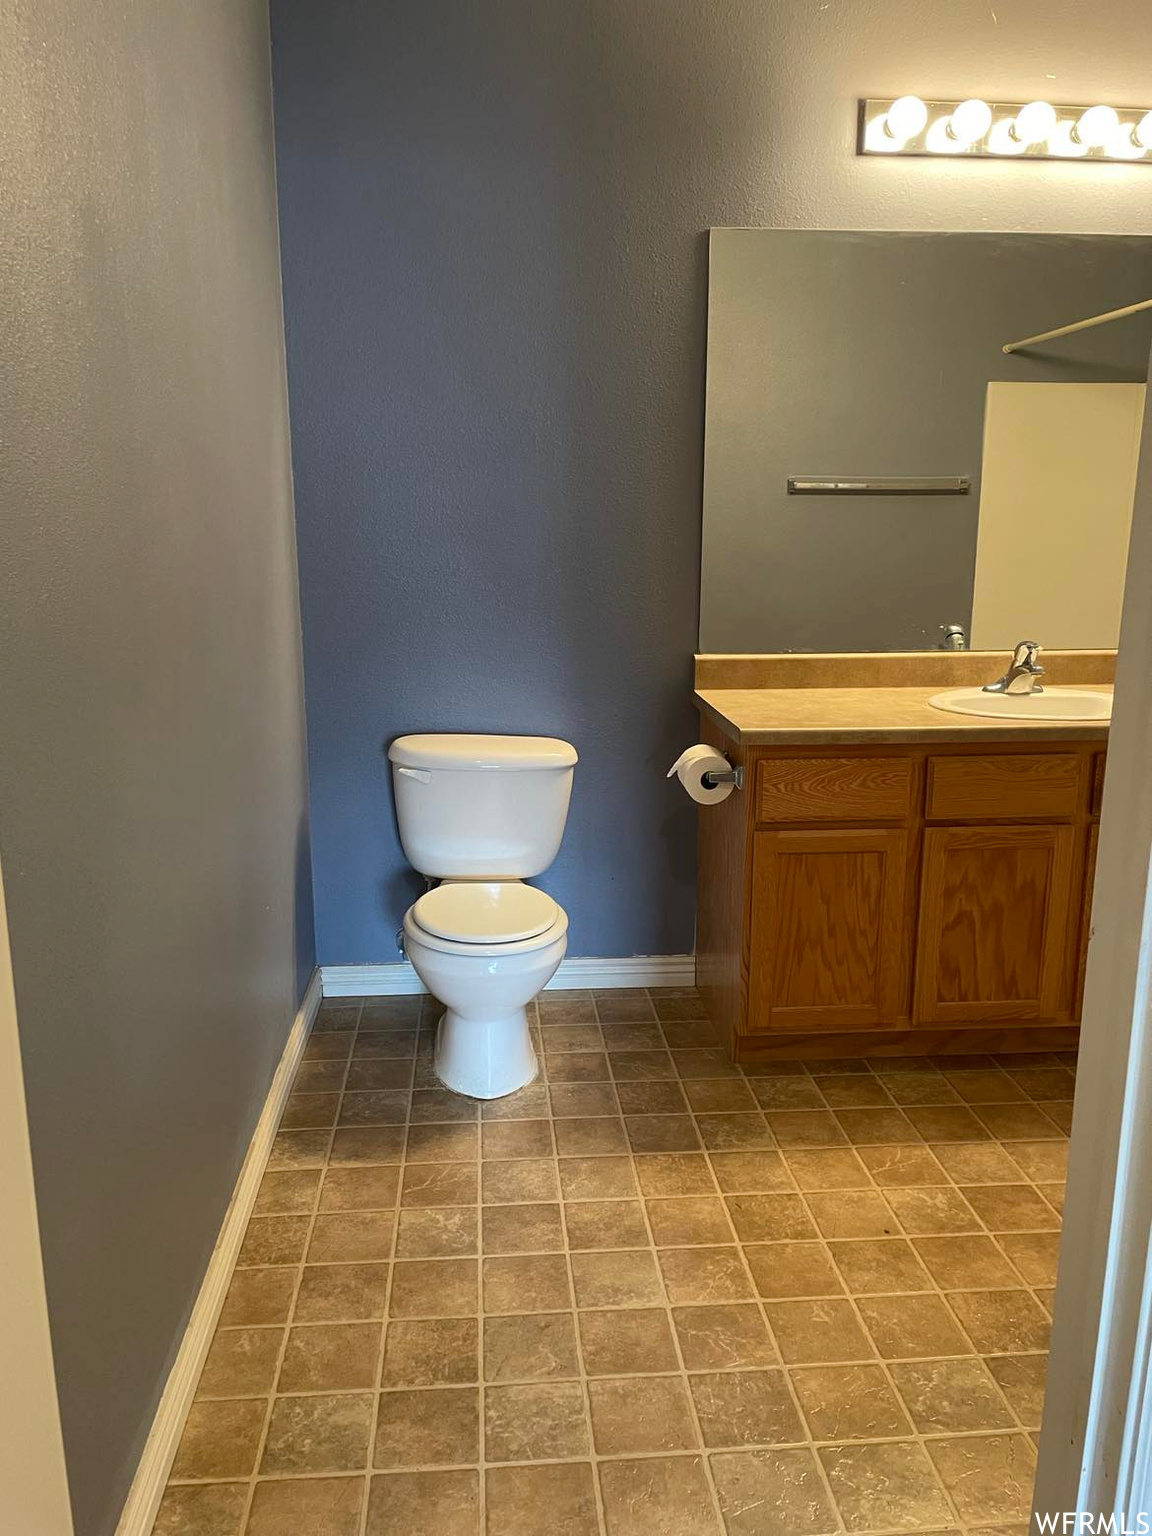 Half bathroom featuring tile floors, toilet, vanity with extensive cabinet space, and mirror